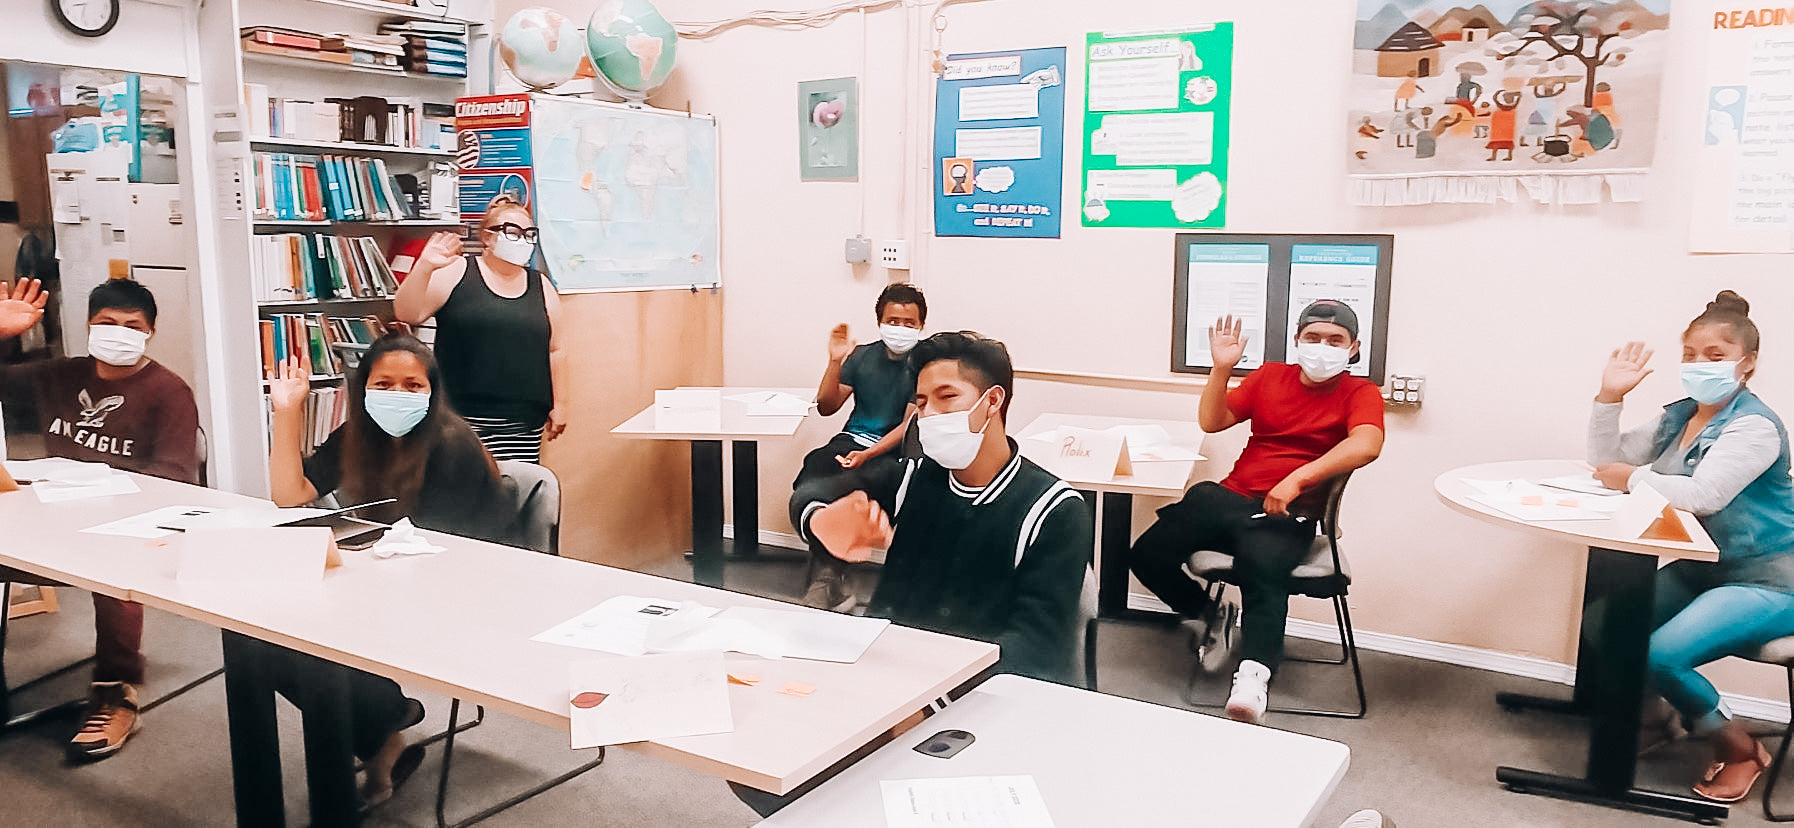 "Small But Mighty": Monster Aid sends Sound Learning three month supply of masks to continue safe education